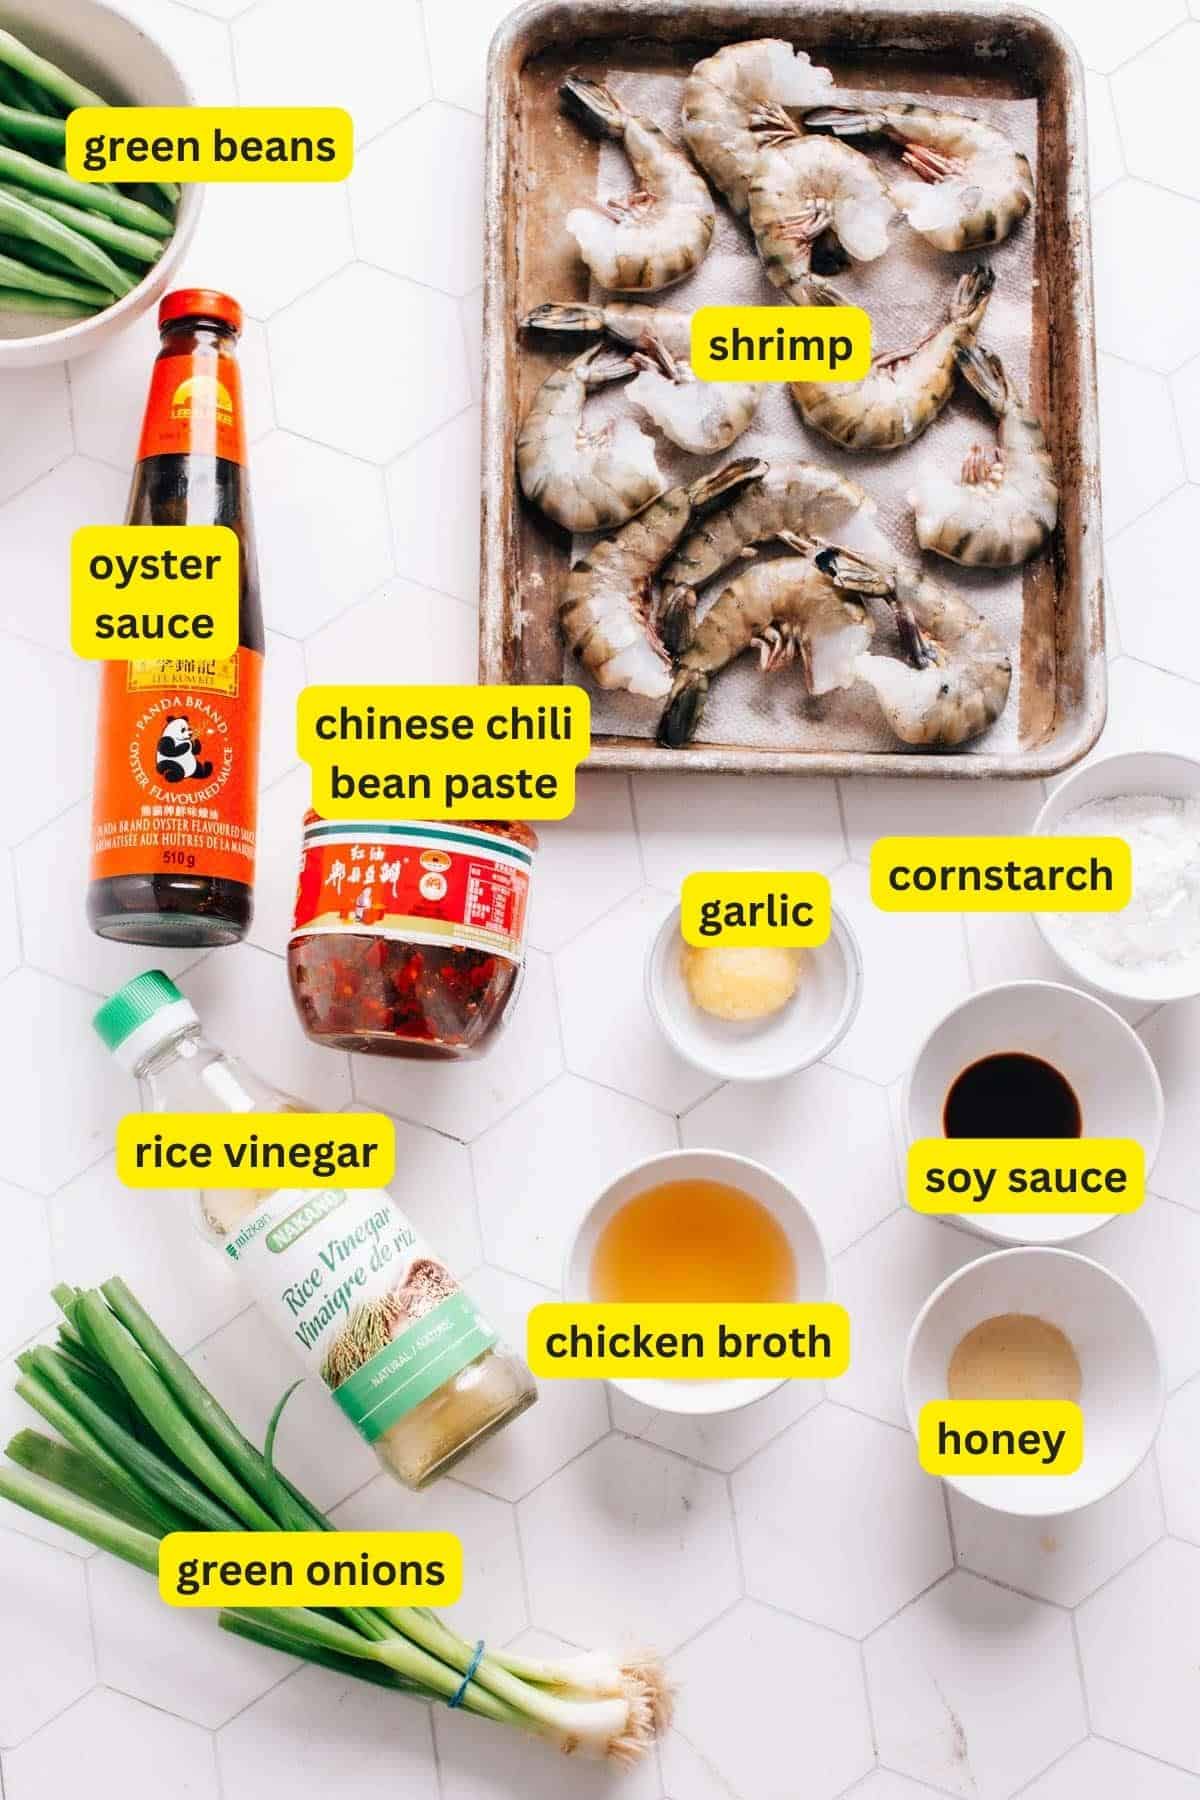 Ingredients for hunan shrimp on a kitche countertop including shrimp
chinese chili bean paste, soy sauce, rice vinegar, oyster sauce, honey, cornstarch, chicken broth, garlic, green beans and green onions.